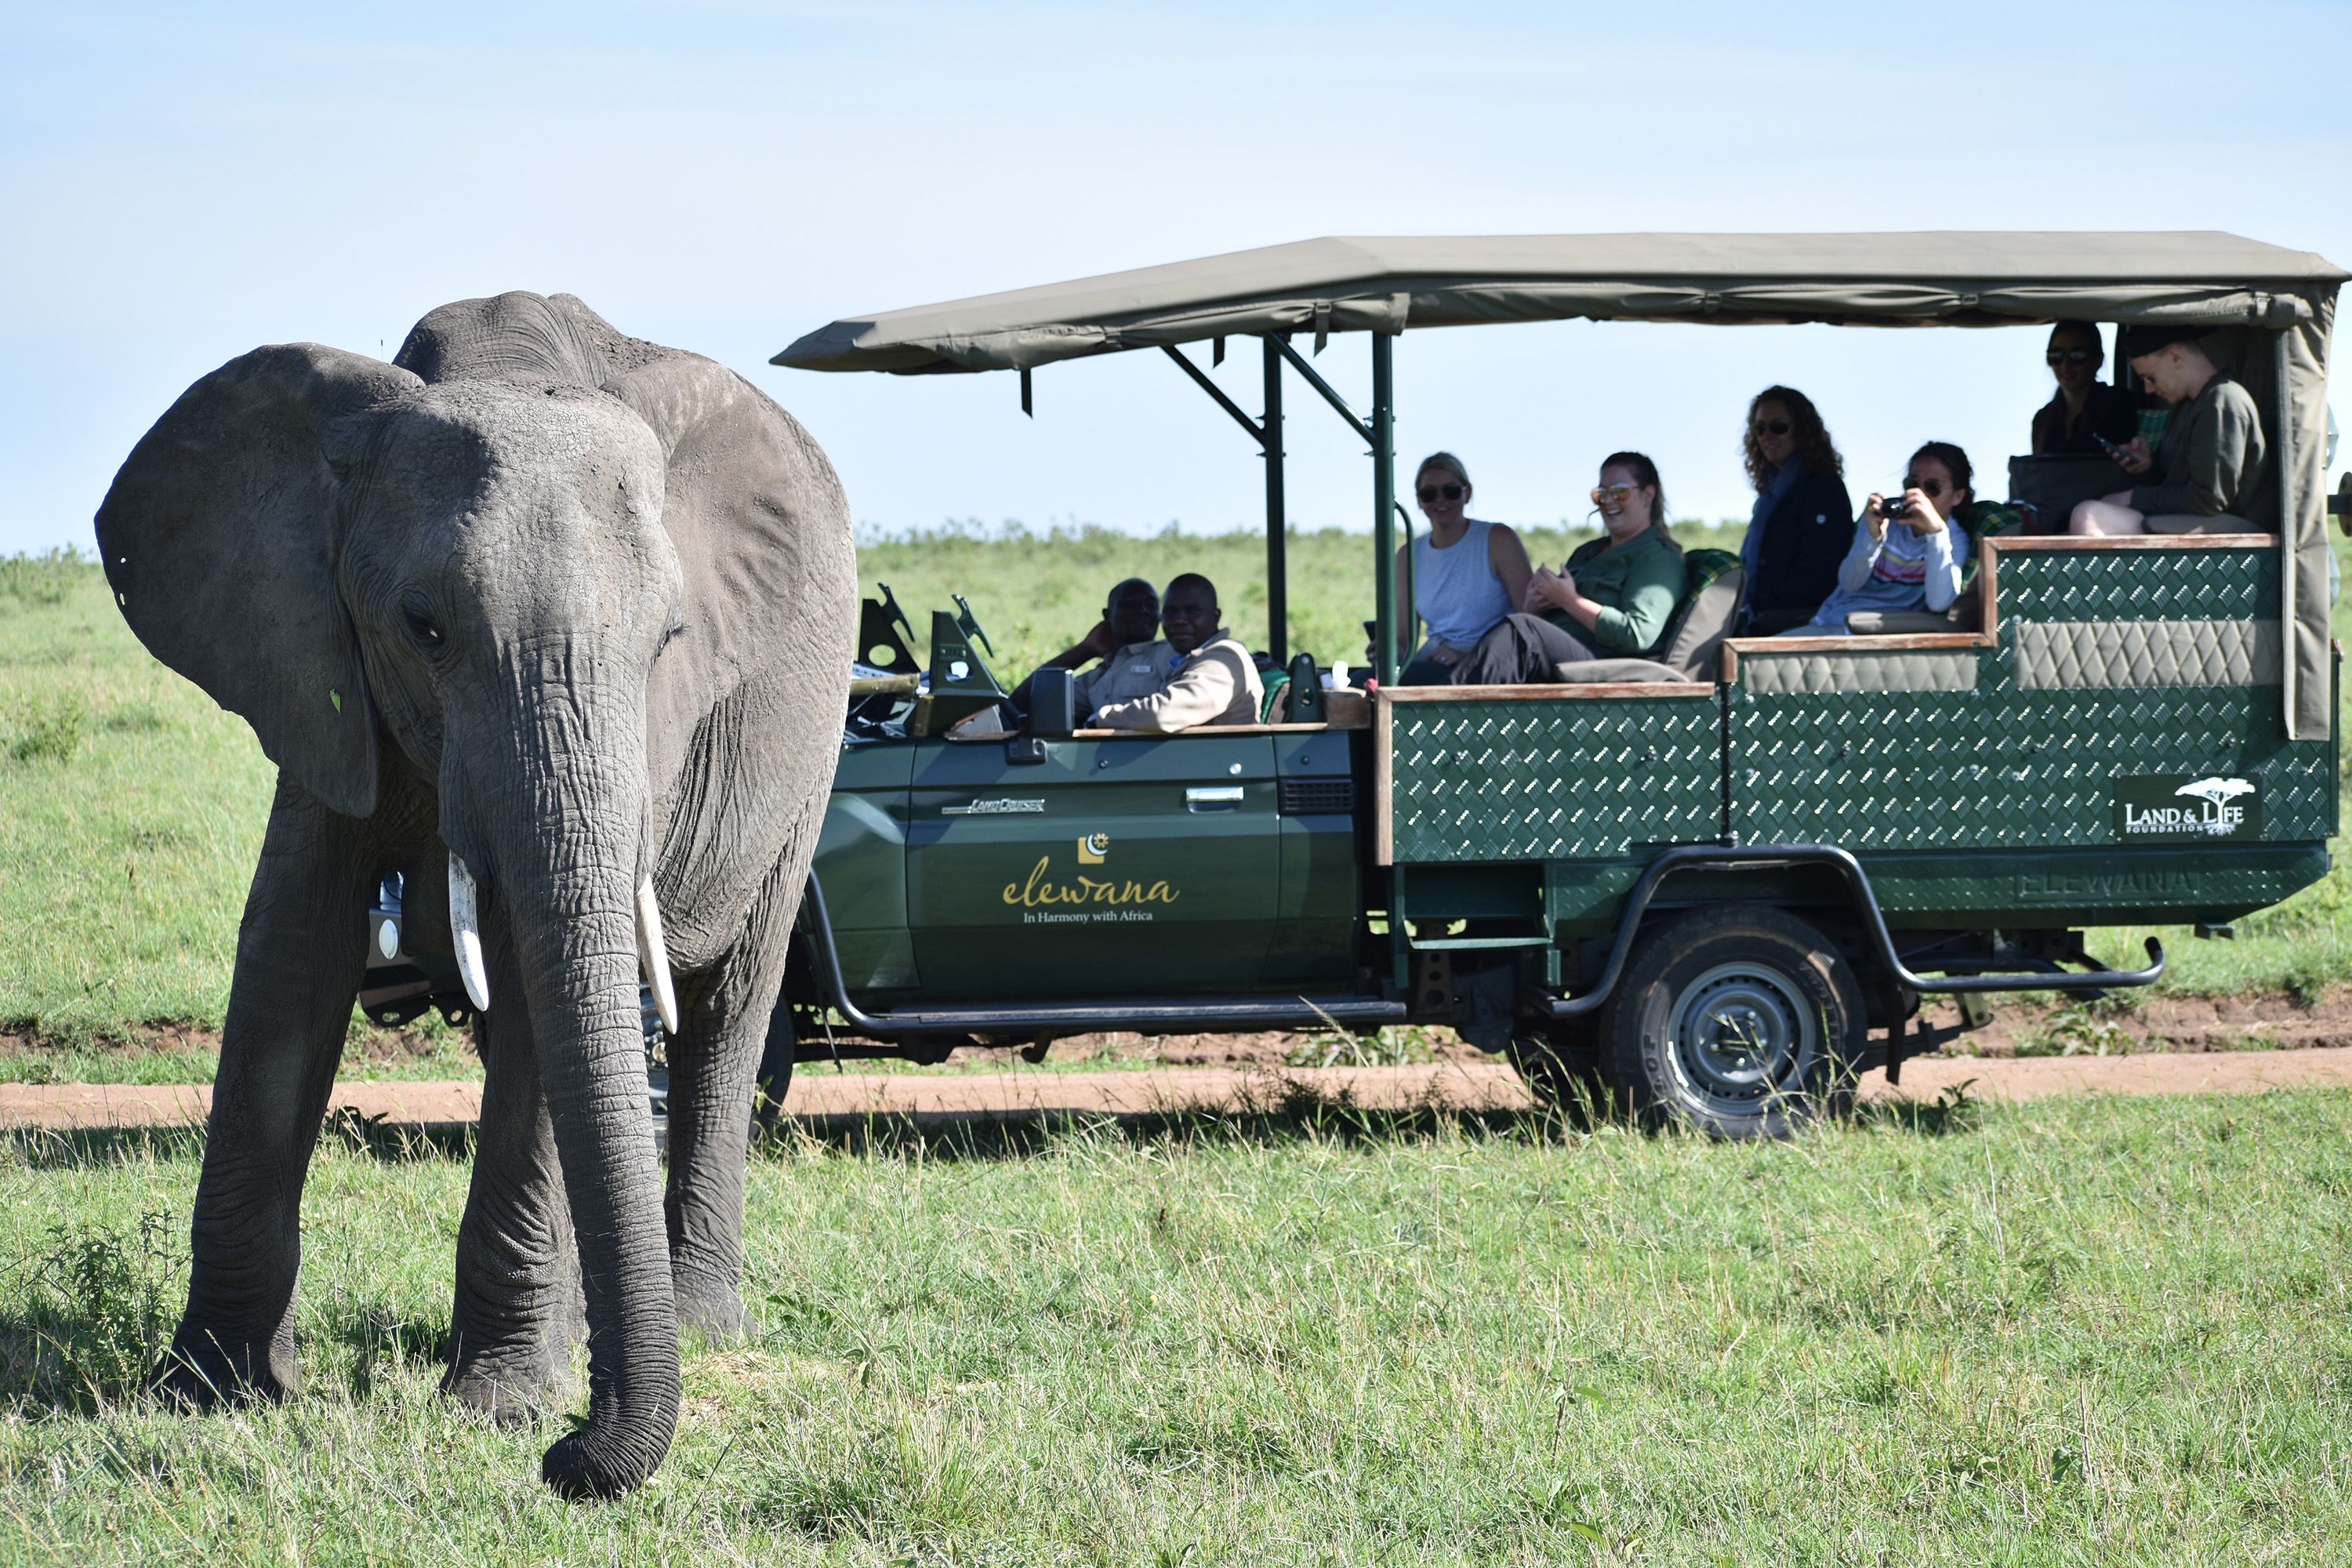 An elephant with a safari vehicle full of people in the background